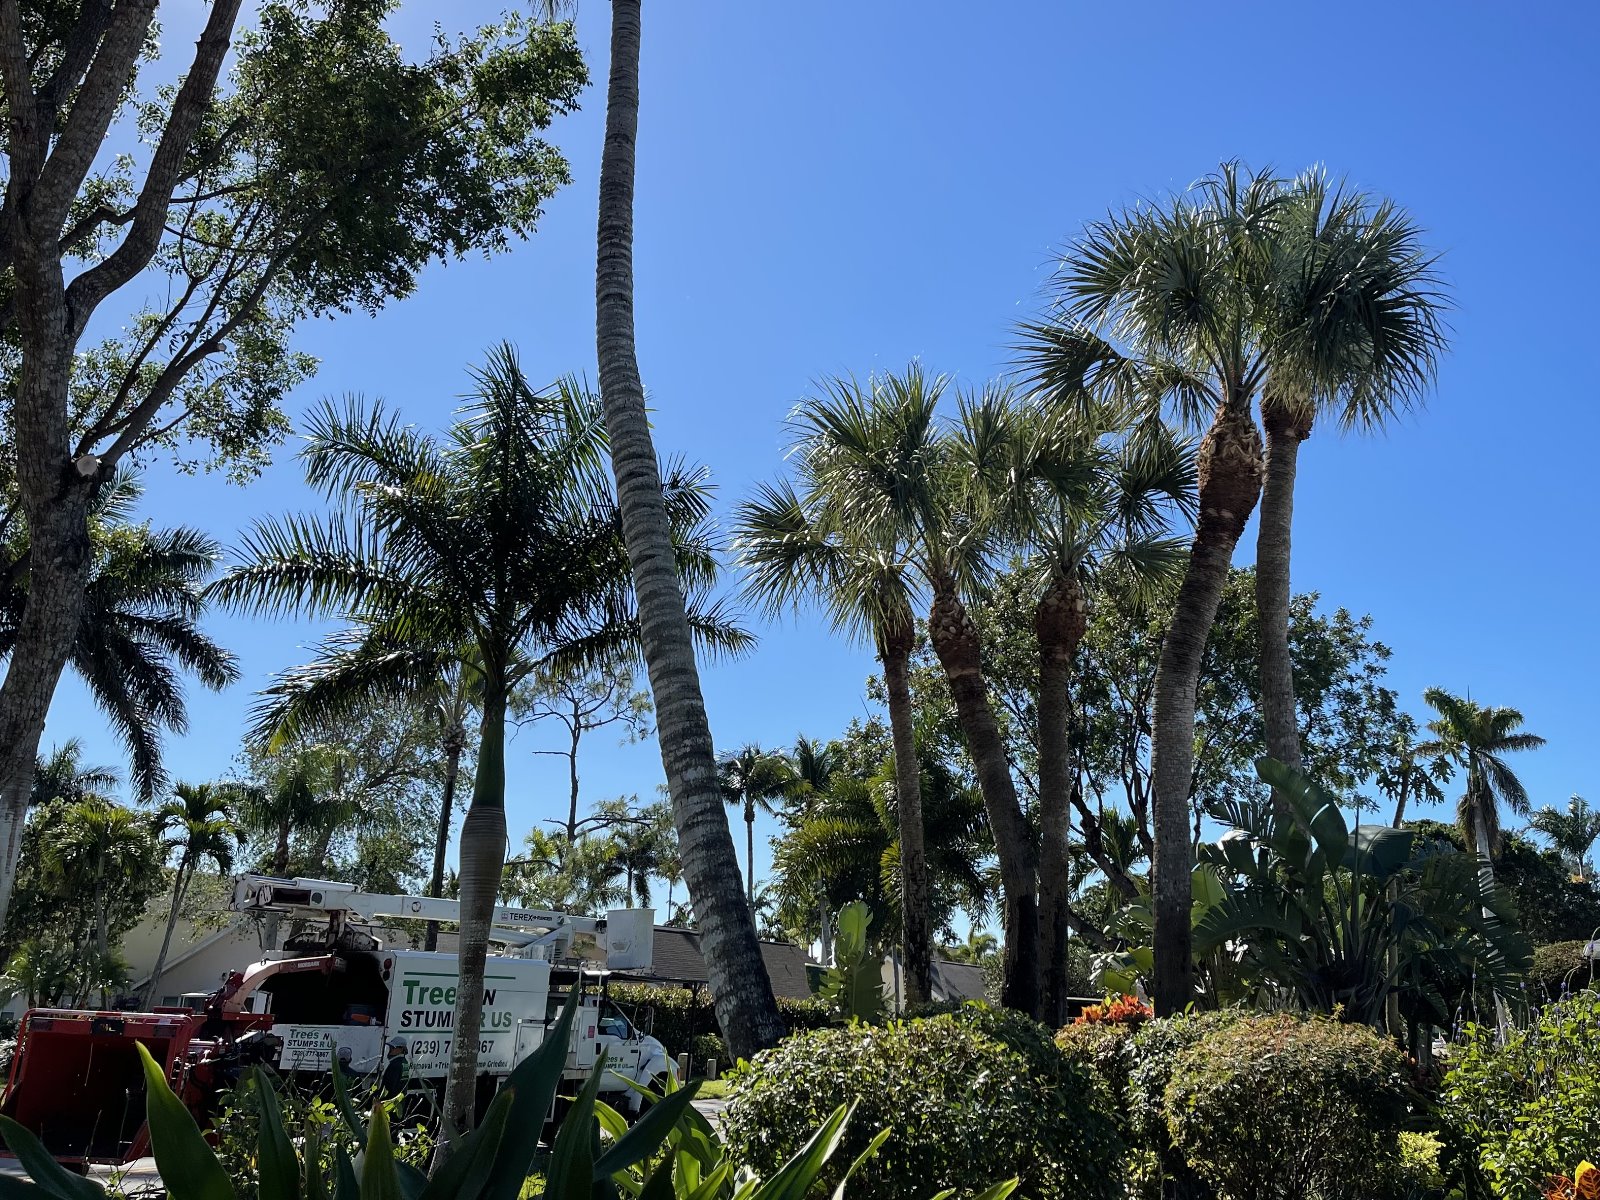 Naples, Florida tree trimming service contractor with over 10 years of experience.